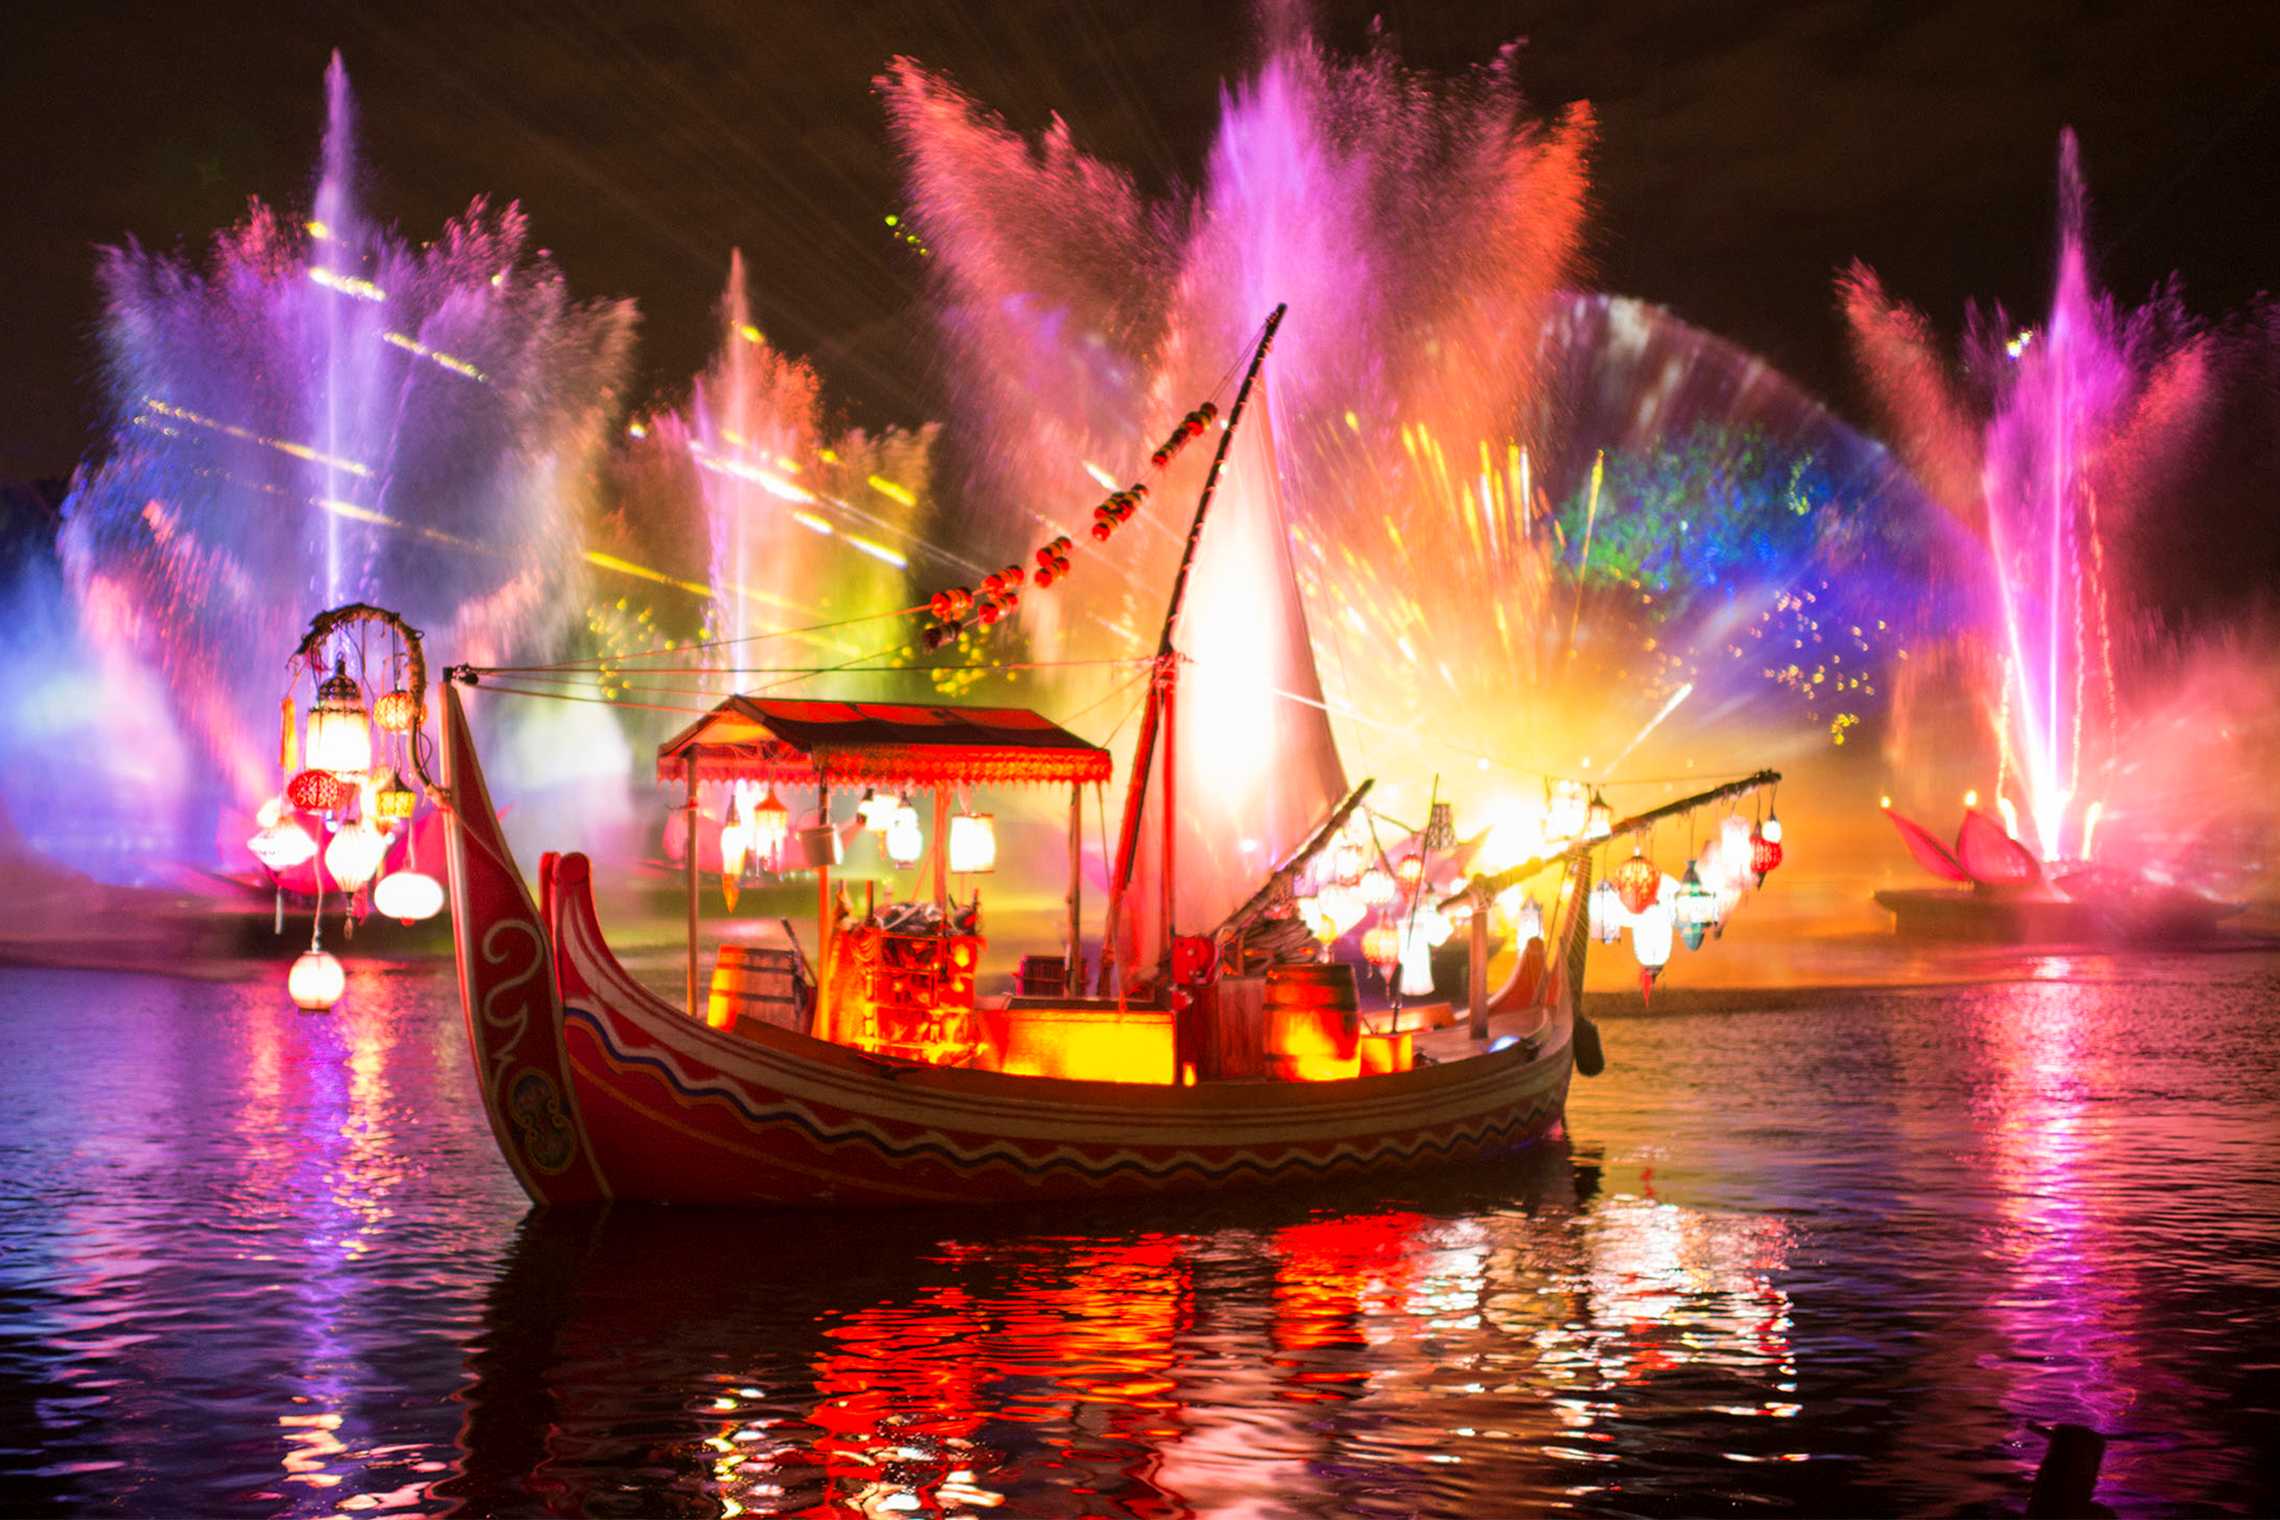 Rivers of Light will officially open on February 17th!